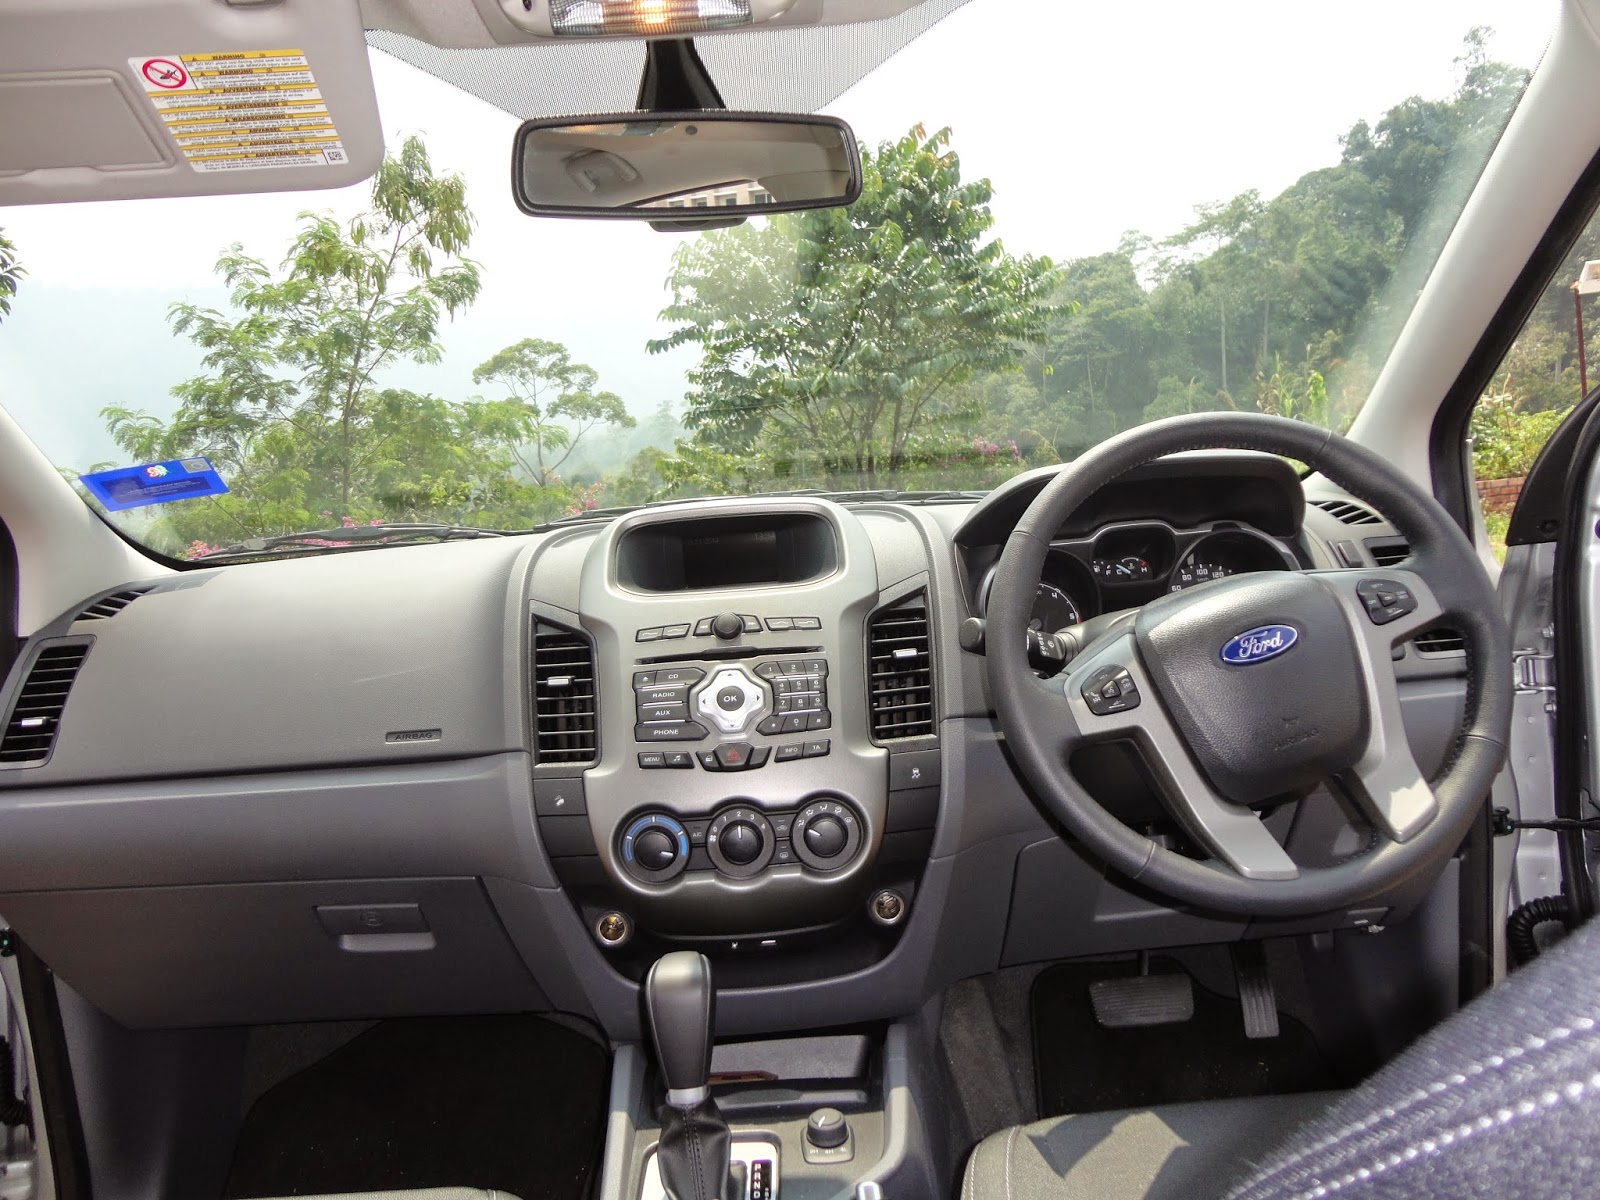 Motoring-Malaysia: Test Drive: 2014 Ford Ranger 2.2l XLT 